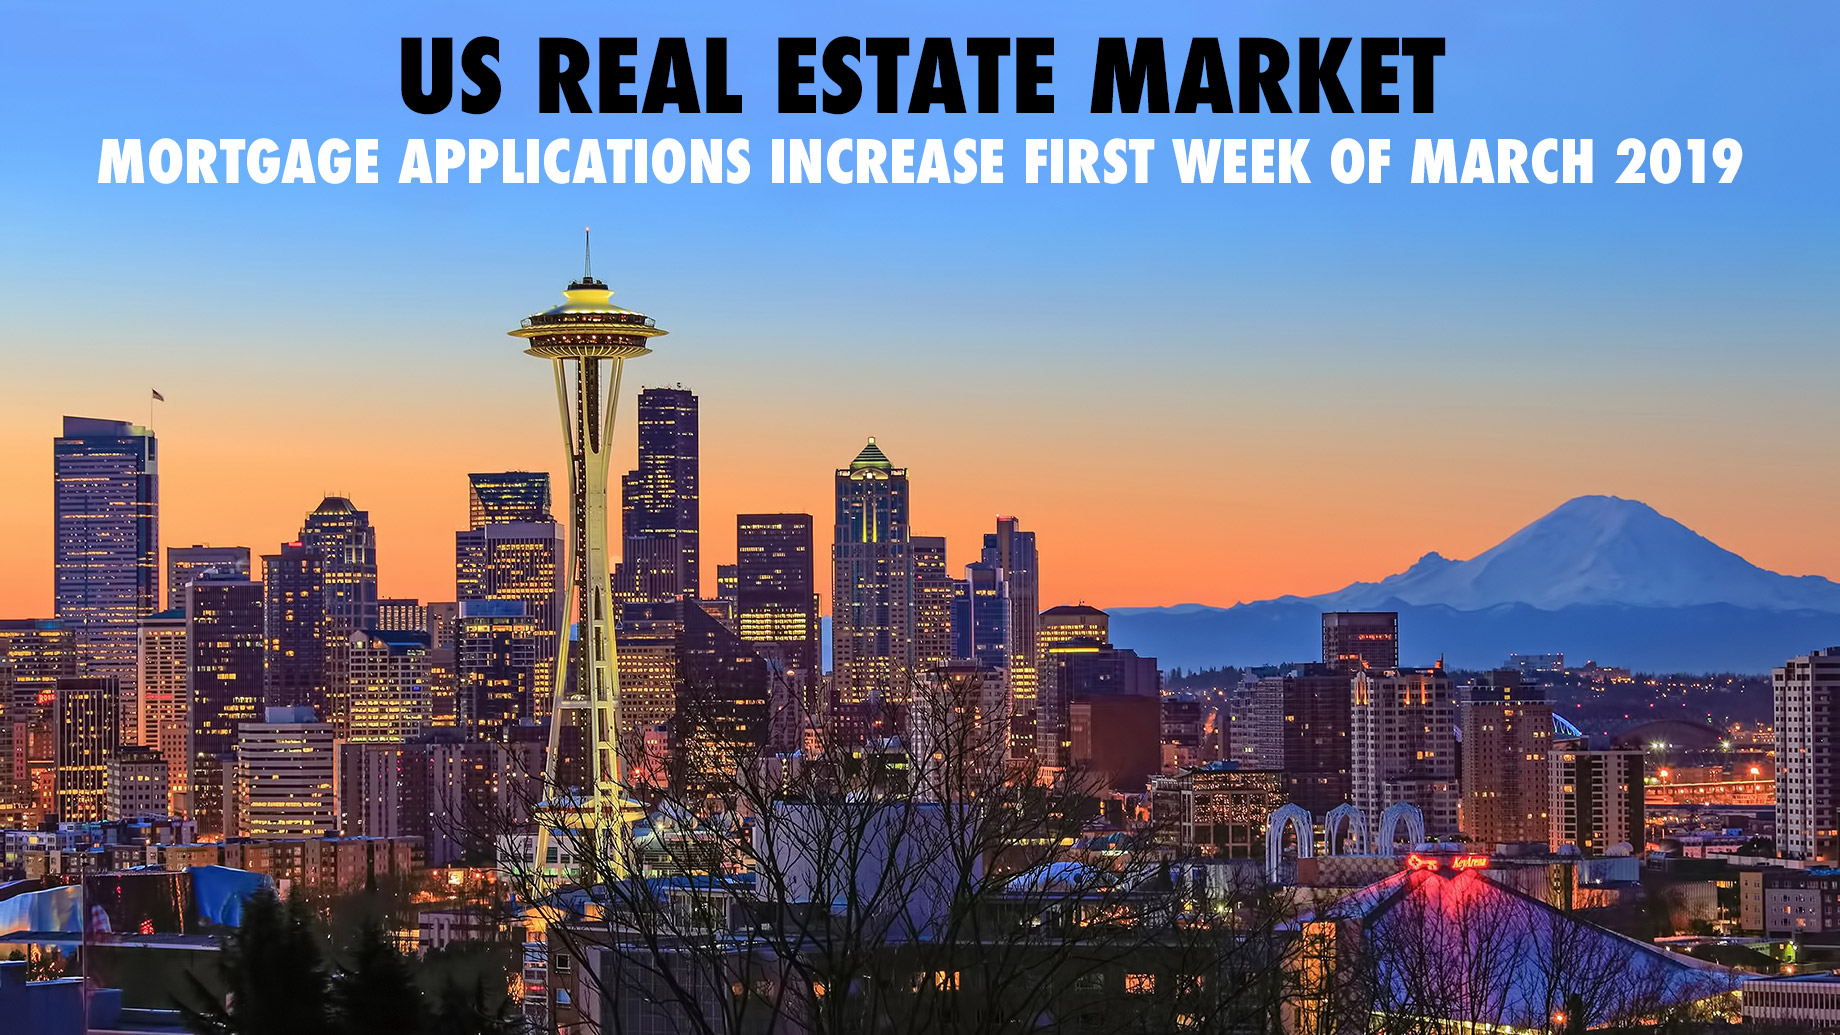 US Real Estate Market - Mortgage Applications Increase First Week of March 2019